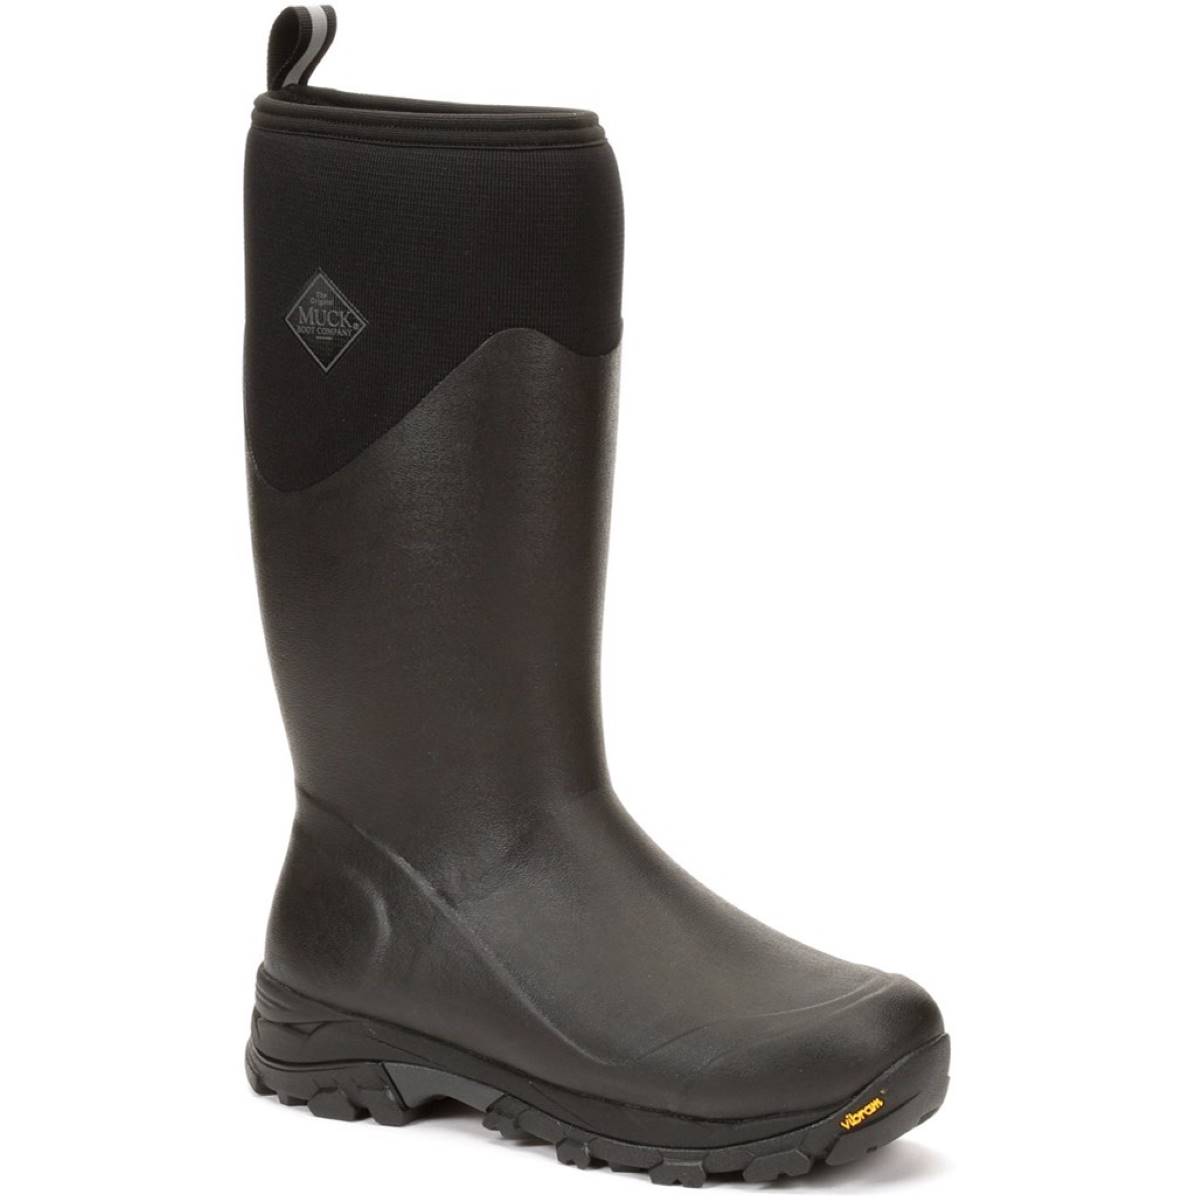 Muck Boots Arctic Ice Tall Black Mens boots AVTVA-000 in a Plain Rubber in Size 14